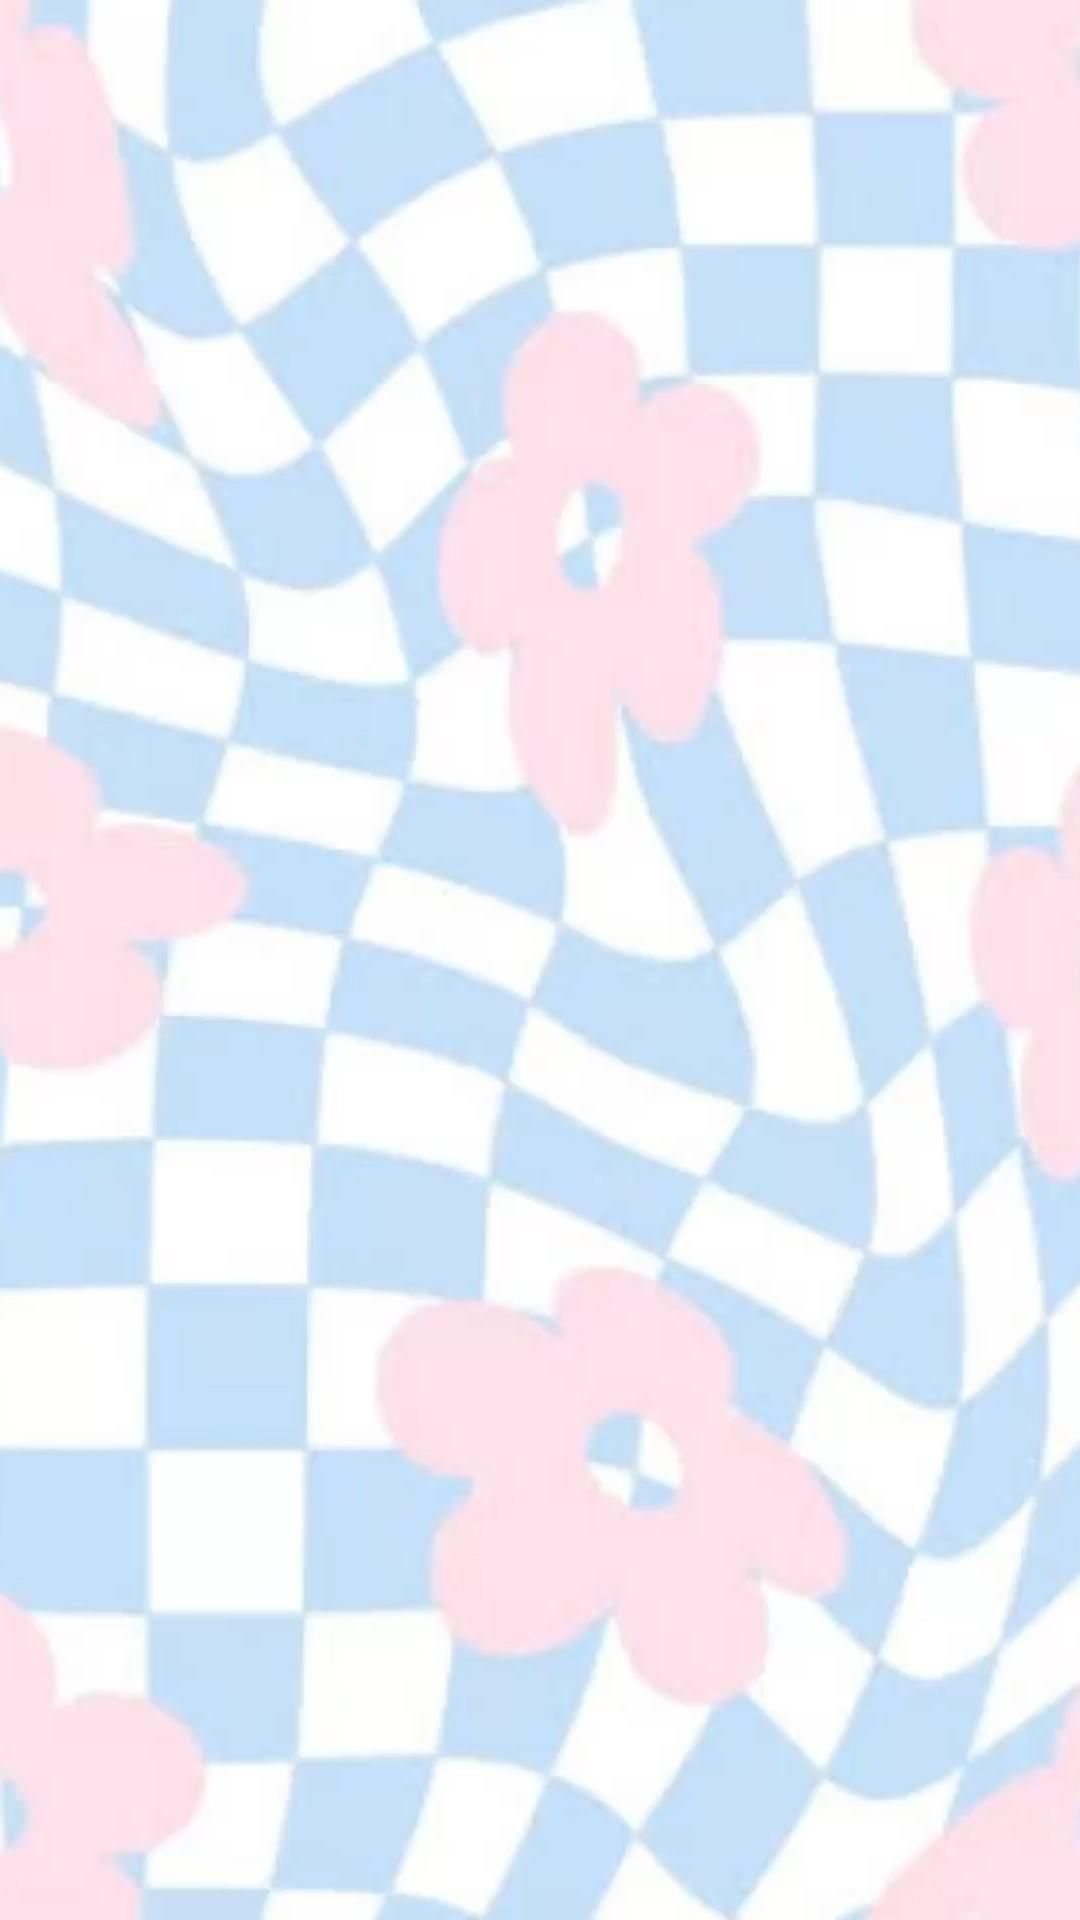 Girly iPhone Wallpaper with high-resolution 1080x1920 pixel. You can use this wallpaper for your iPhone 5, 6, 7, 8, X, XS, XR backgrounds, Mobile Screensaver, or iPad Lock Screen - Danish, preppy, pastel, checkered